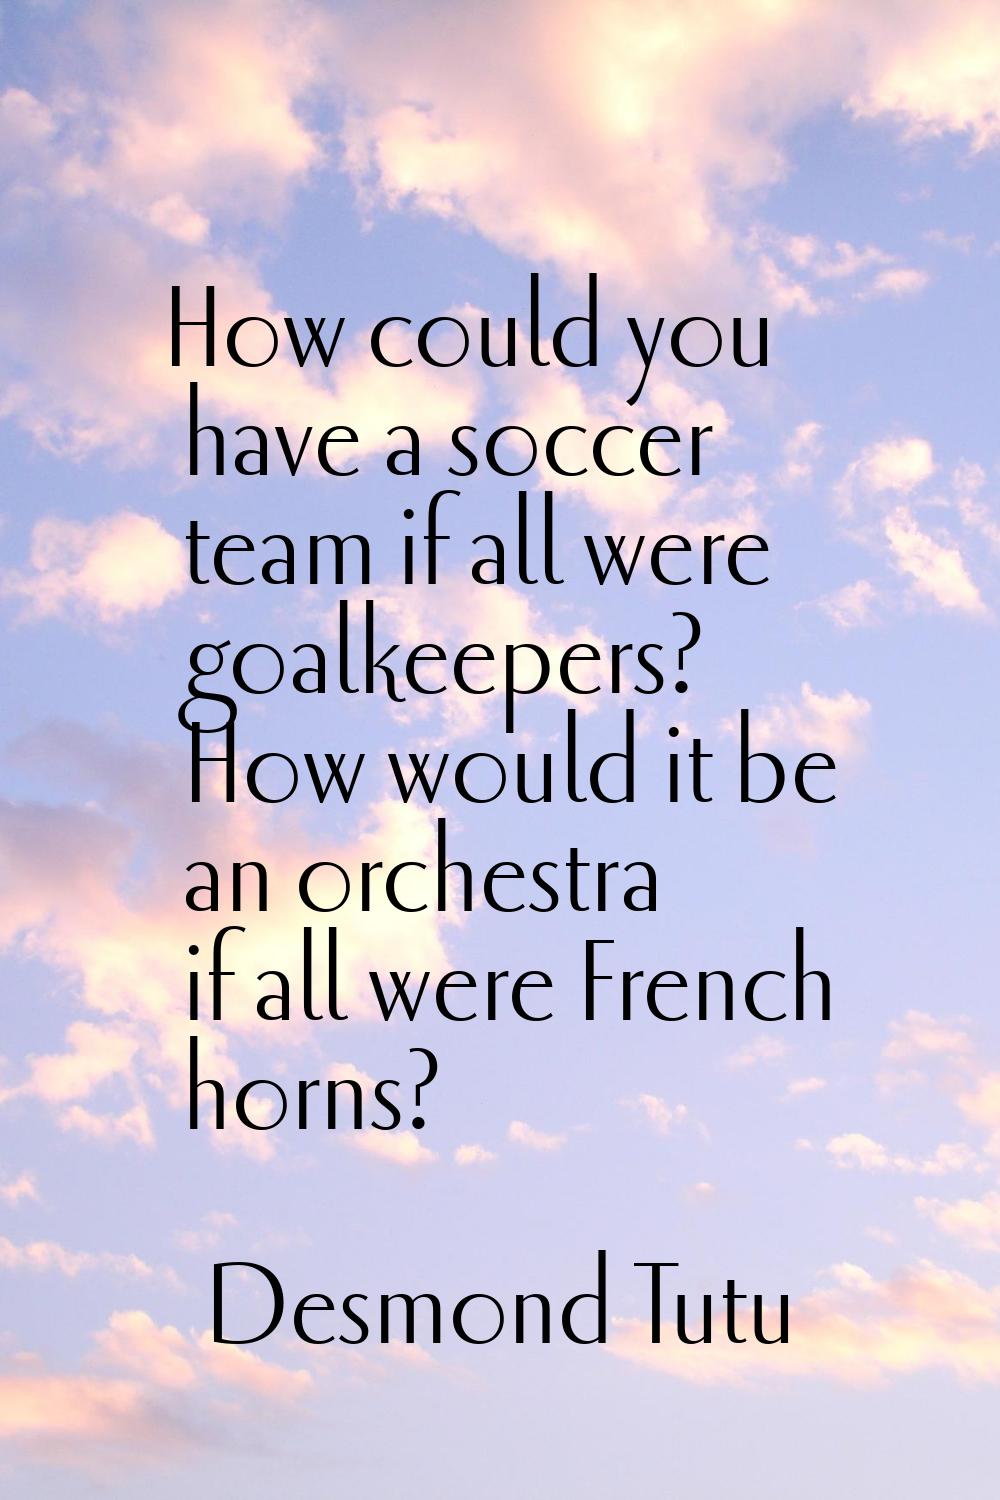 How could you have a soccer team if all were goalkeepers? How would it be an orchestra if all were 